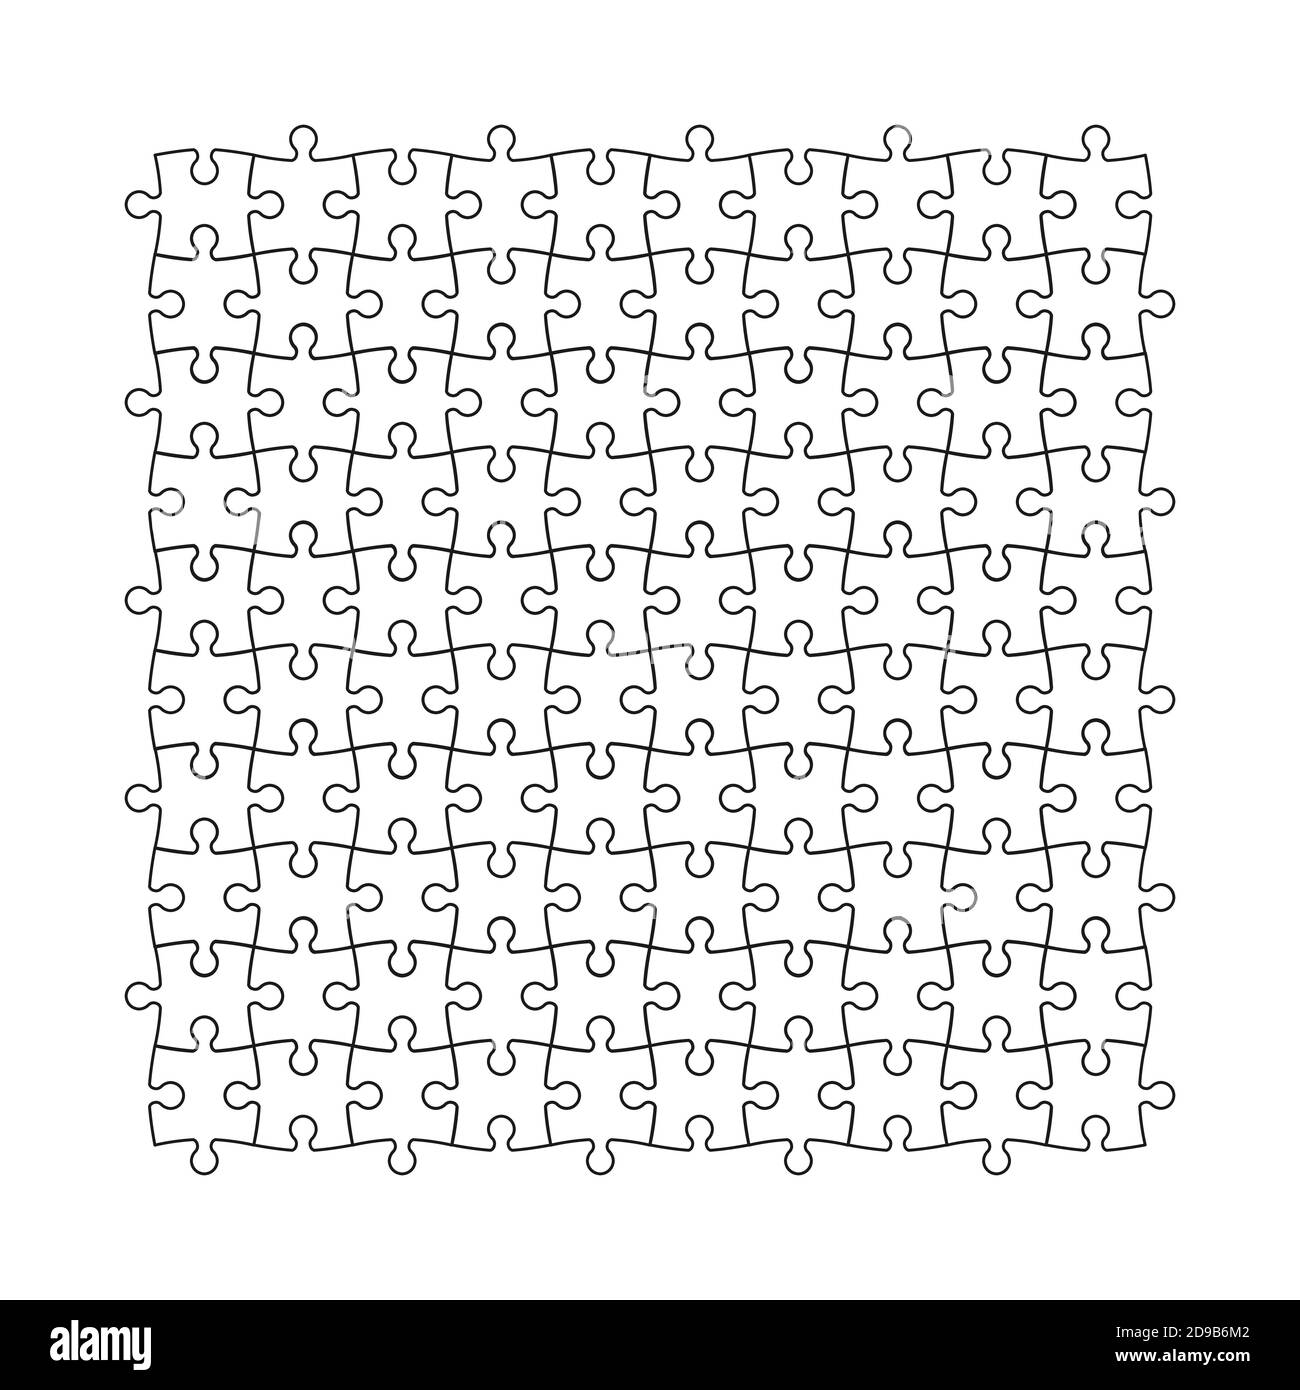 Vector blank puzzle pieces for jigsaw game